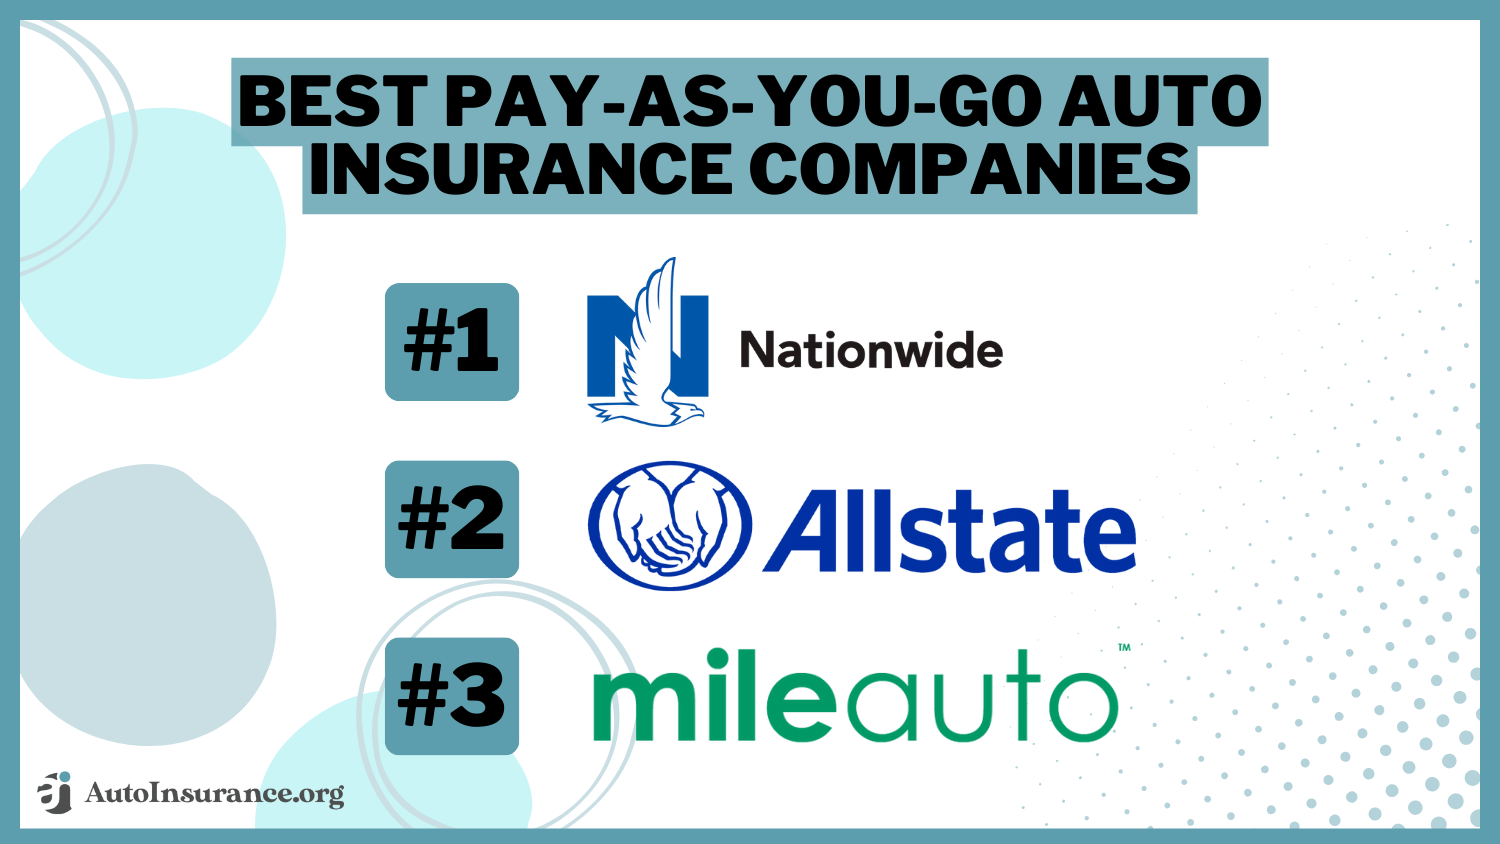 nationwide Allstate mileauto best pay-as-you-go auto insurance companies